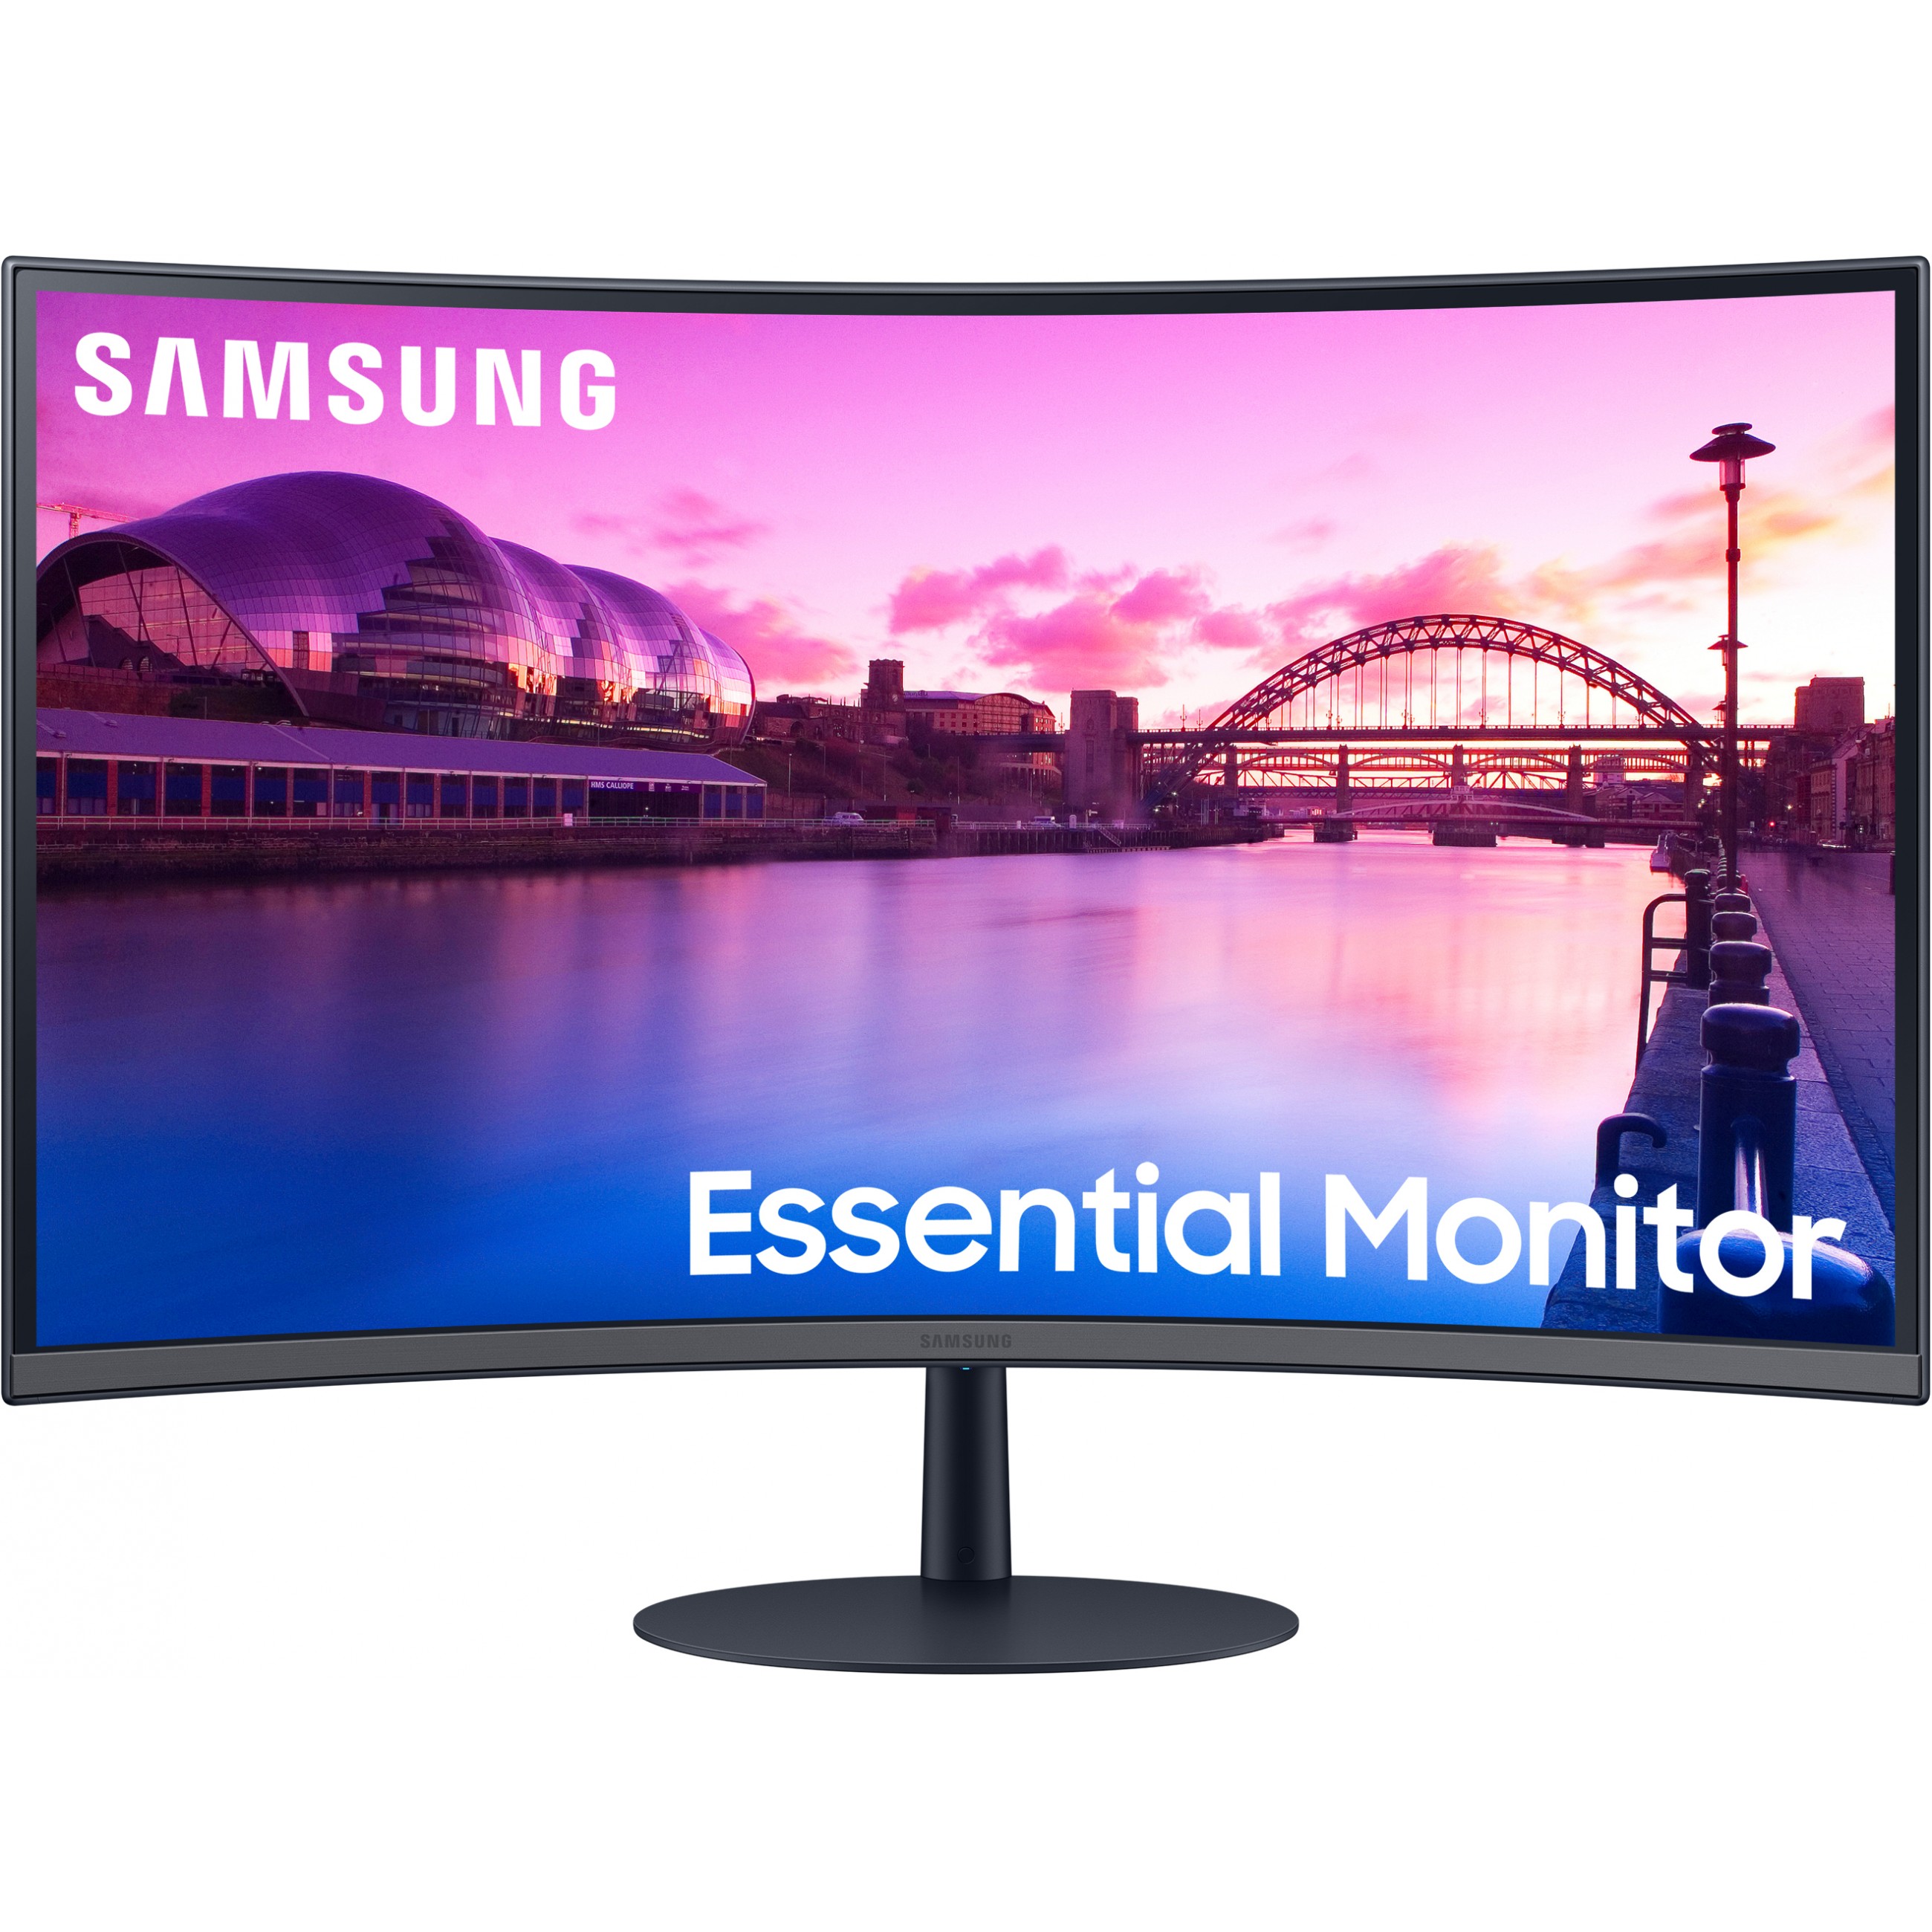 Samsung Essential Monitor S39C LED display - LS32C390EAUXEN